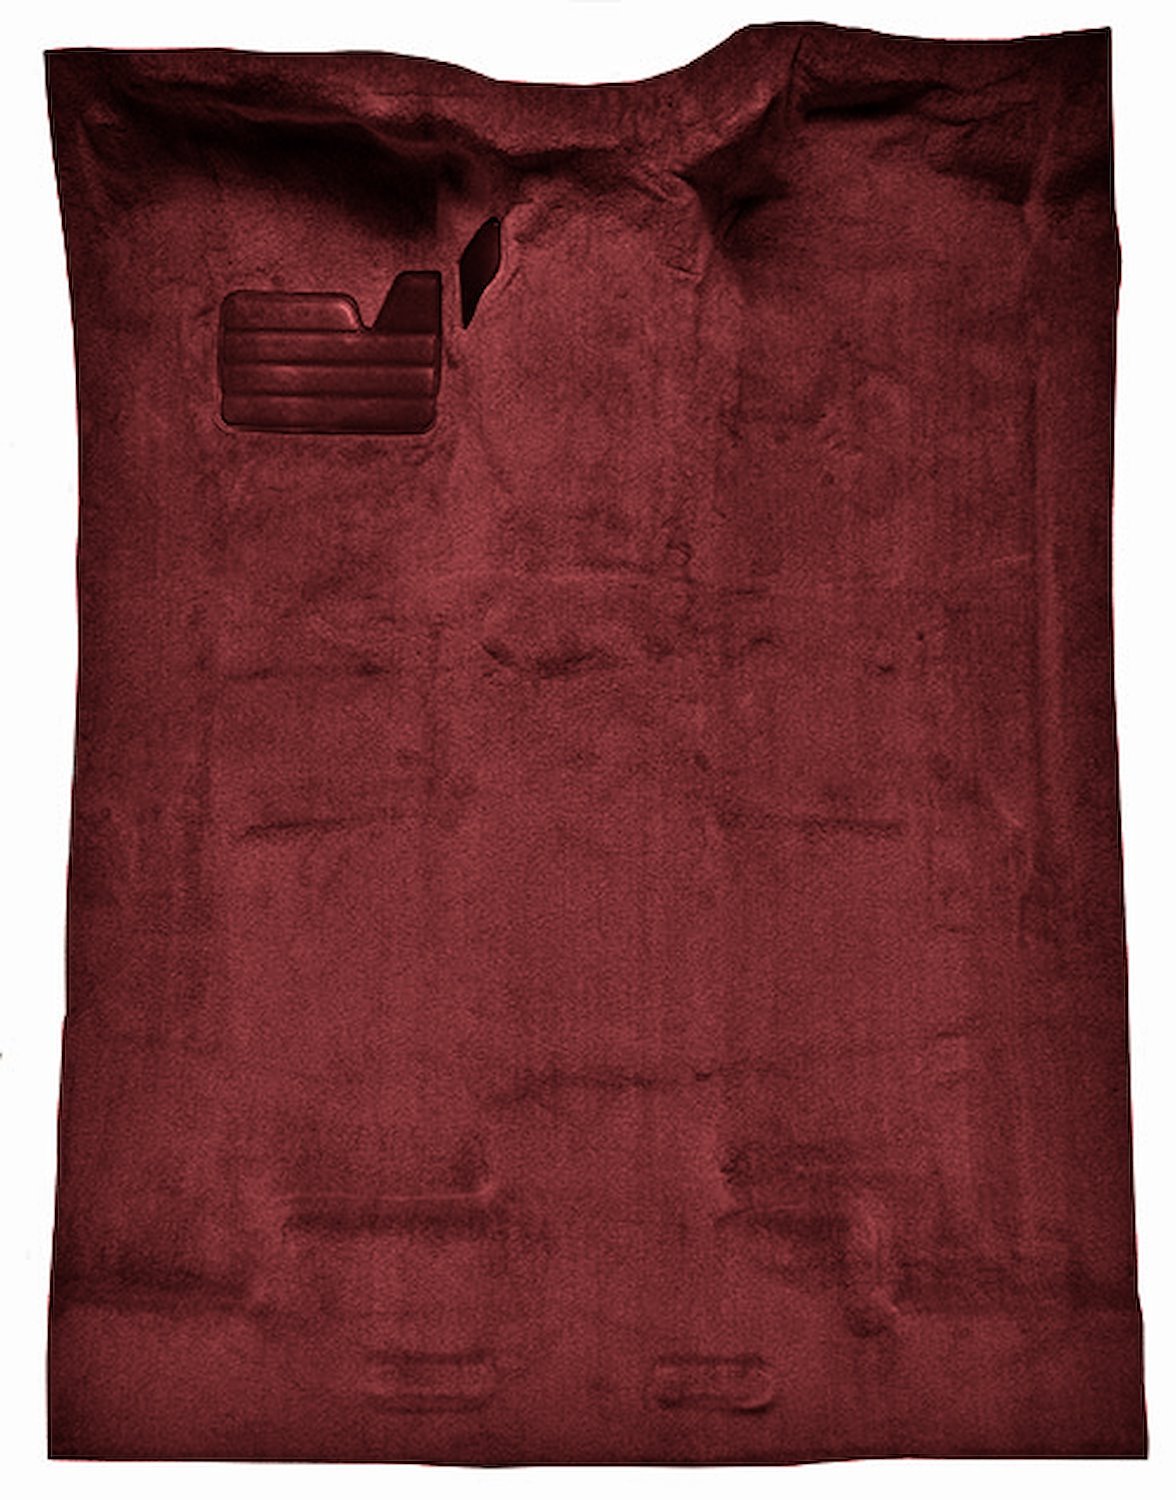 Molded Cut Pile Carpet for 1988-2002 Chevrolet/GMC C/K Series Trucks [OE-Style Jute Backing, Extended Cab, 1-Piece, Maroon]